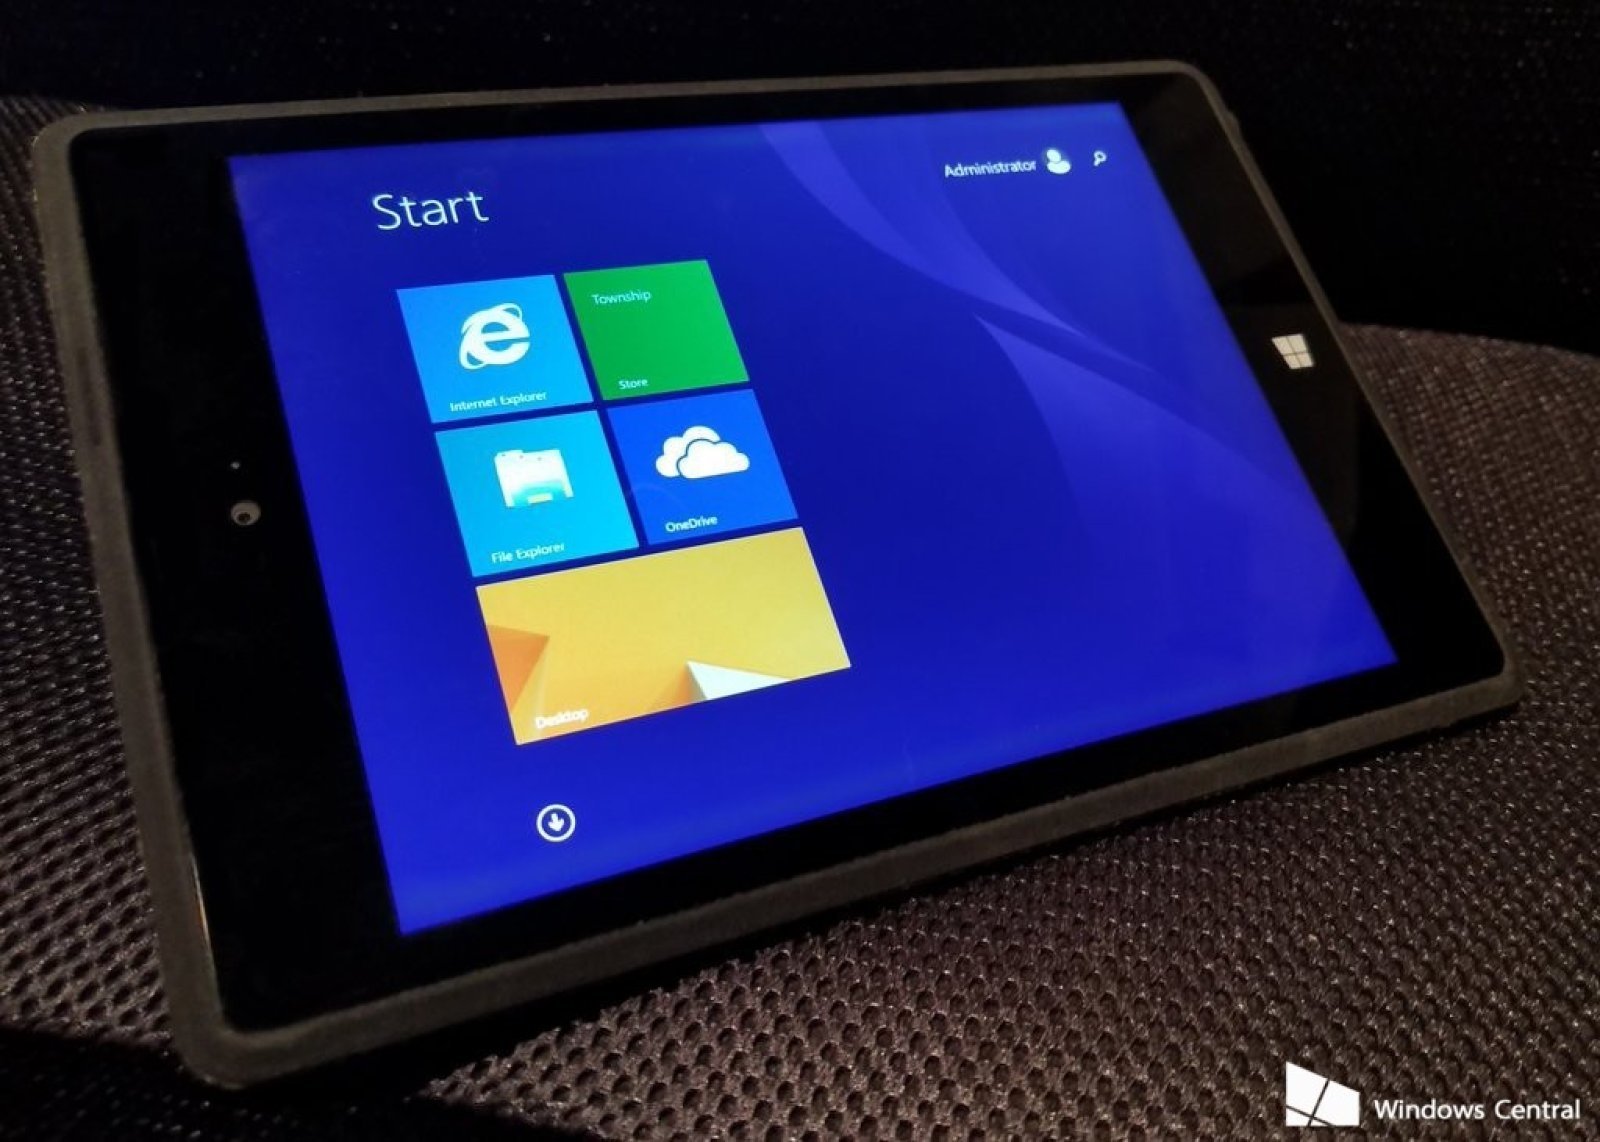 Here is the Surface Mini that Microsoft never launched